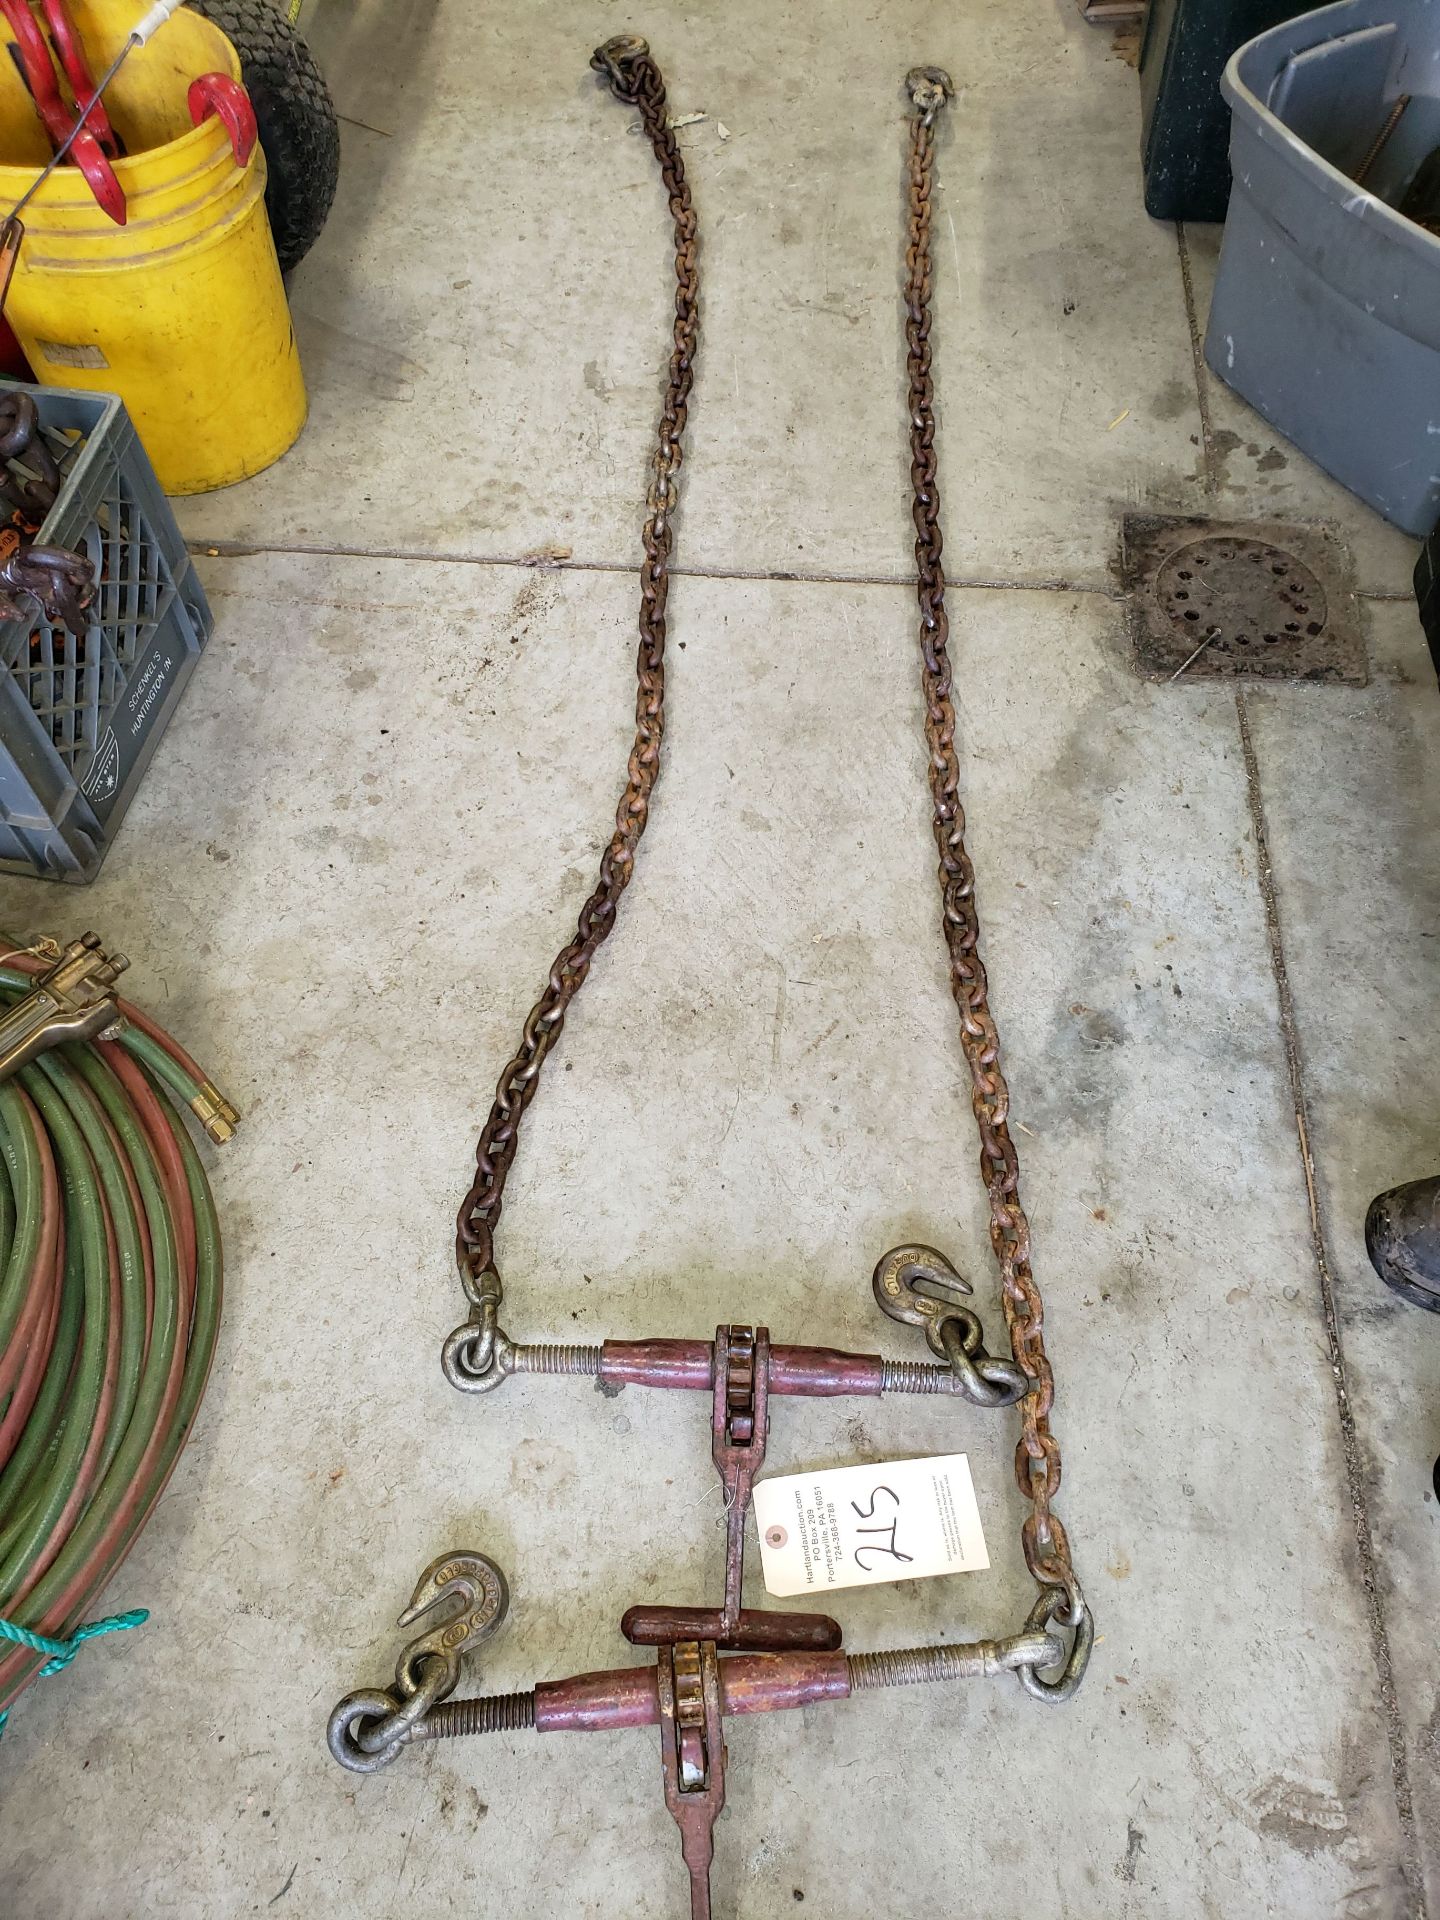 2 RATCHET CHAIN BINDERS WITH EXTENDED CHAIN